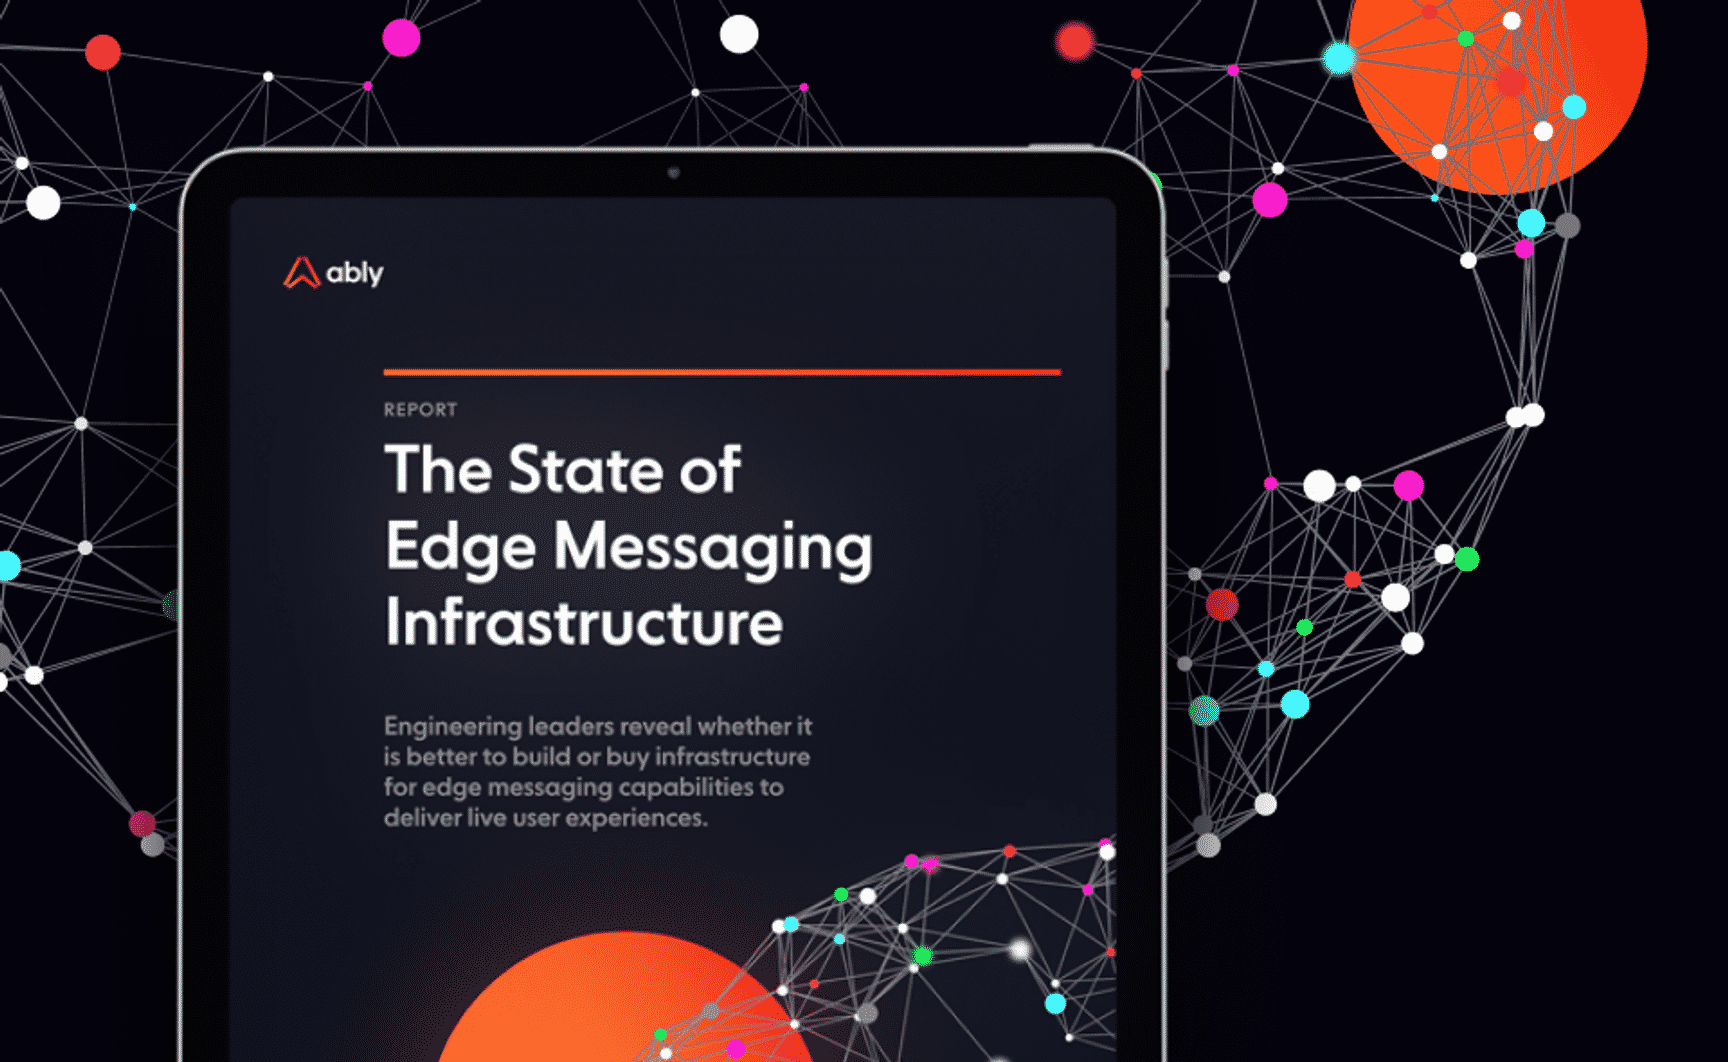 The state of edge messaging infrastructure